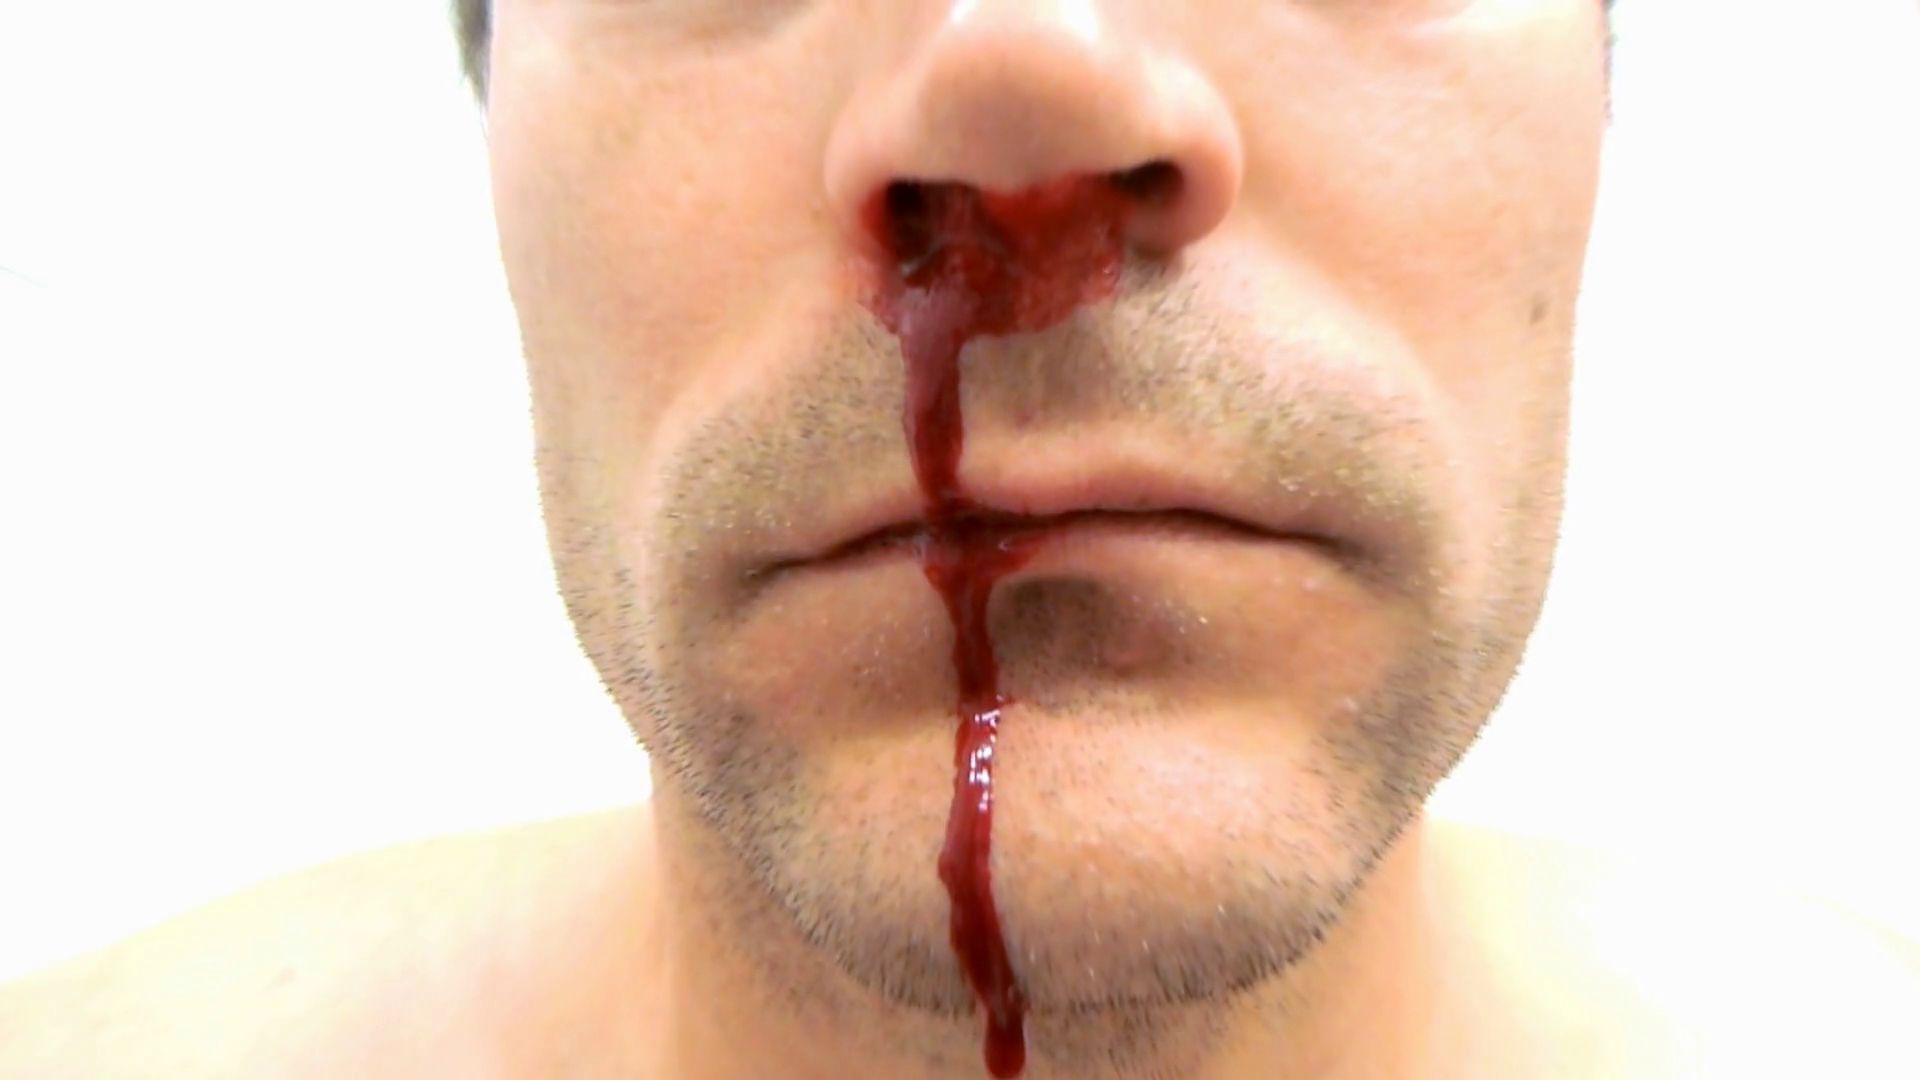 A Man's Nose Dripping With Blood